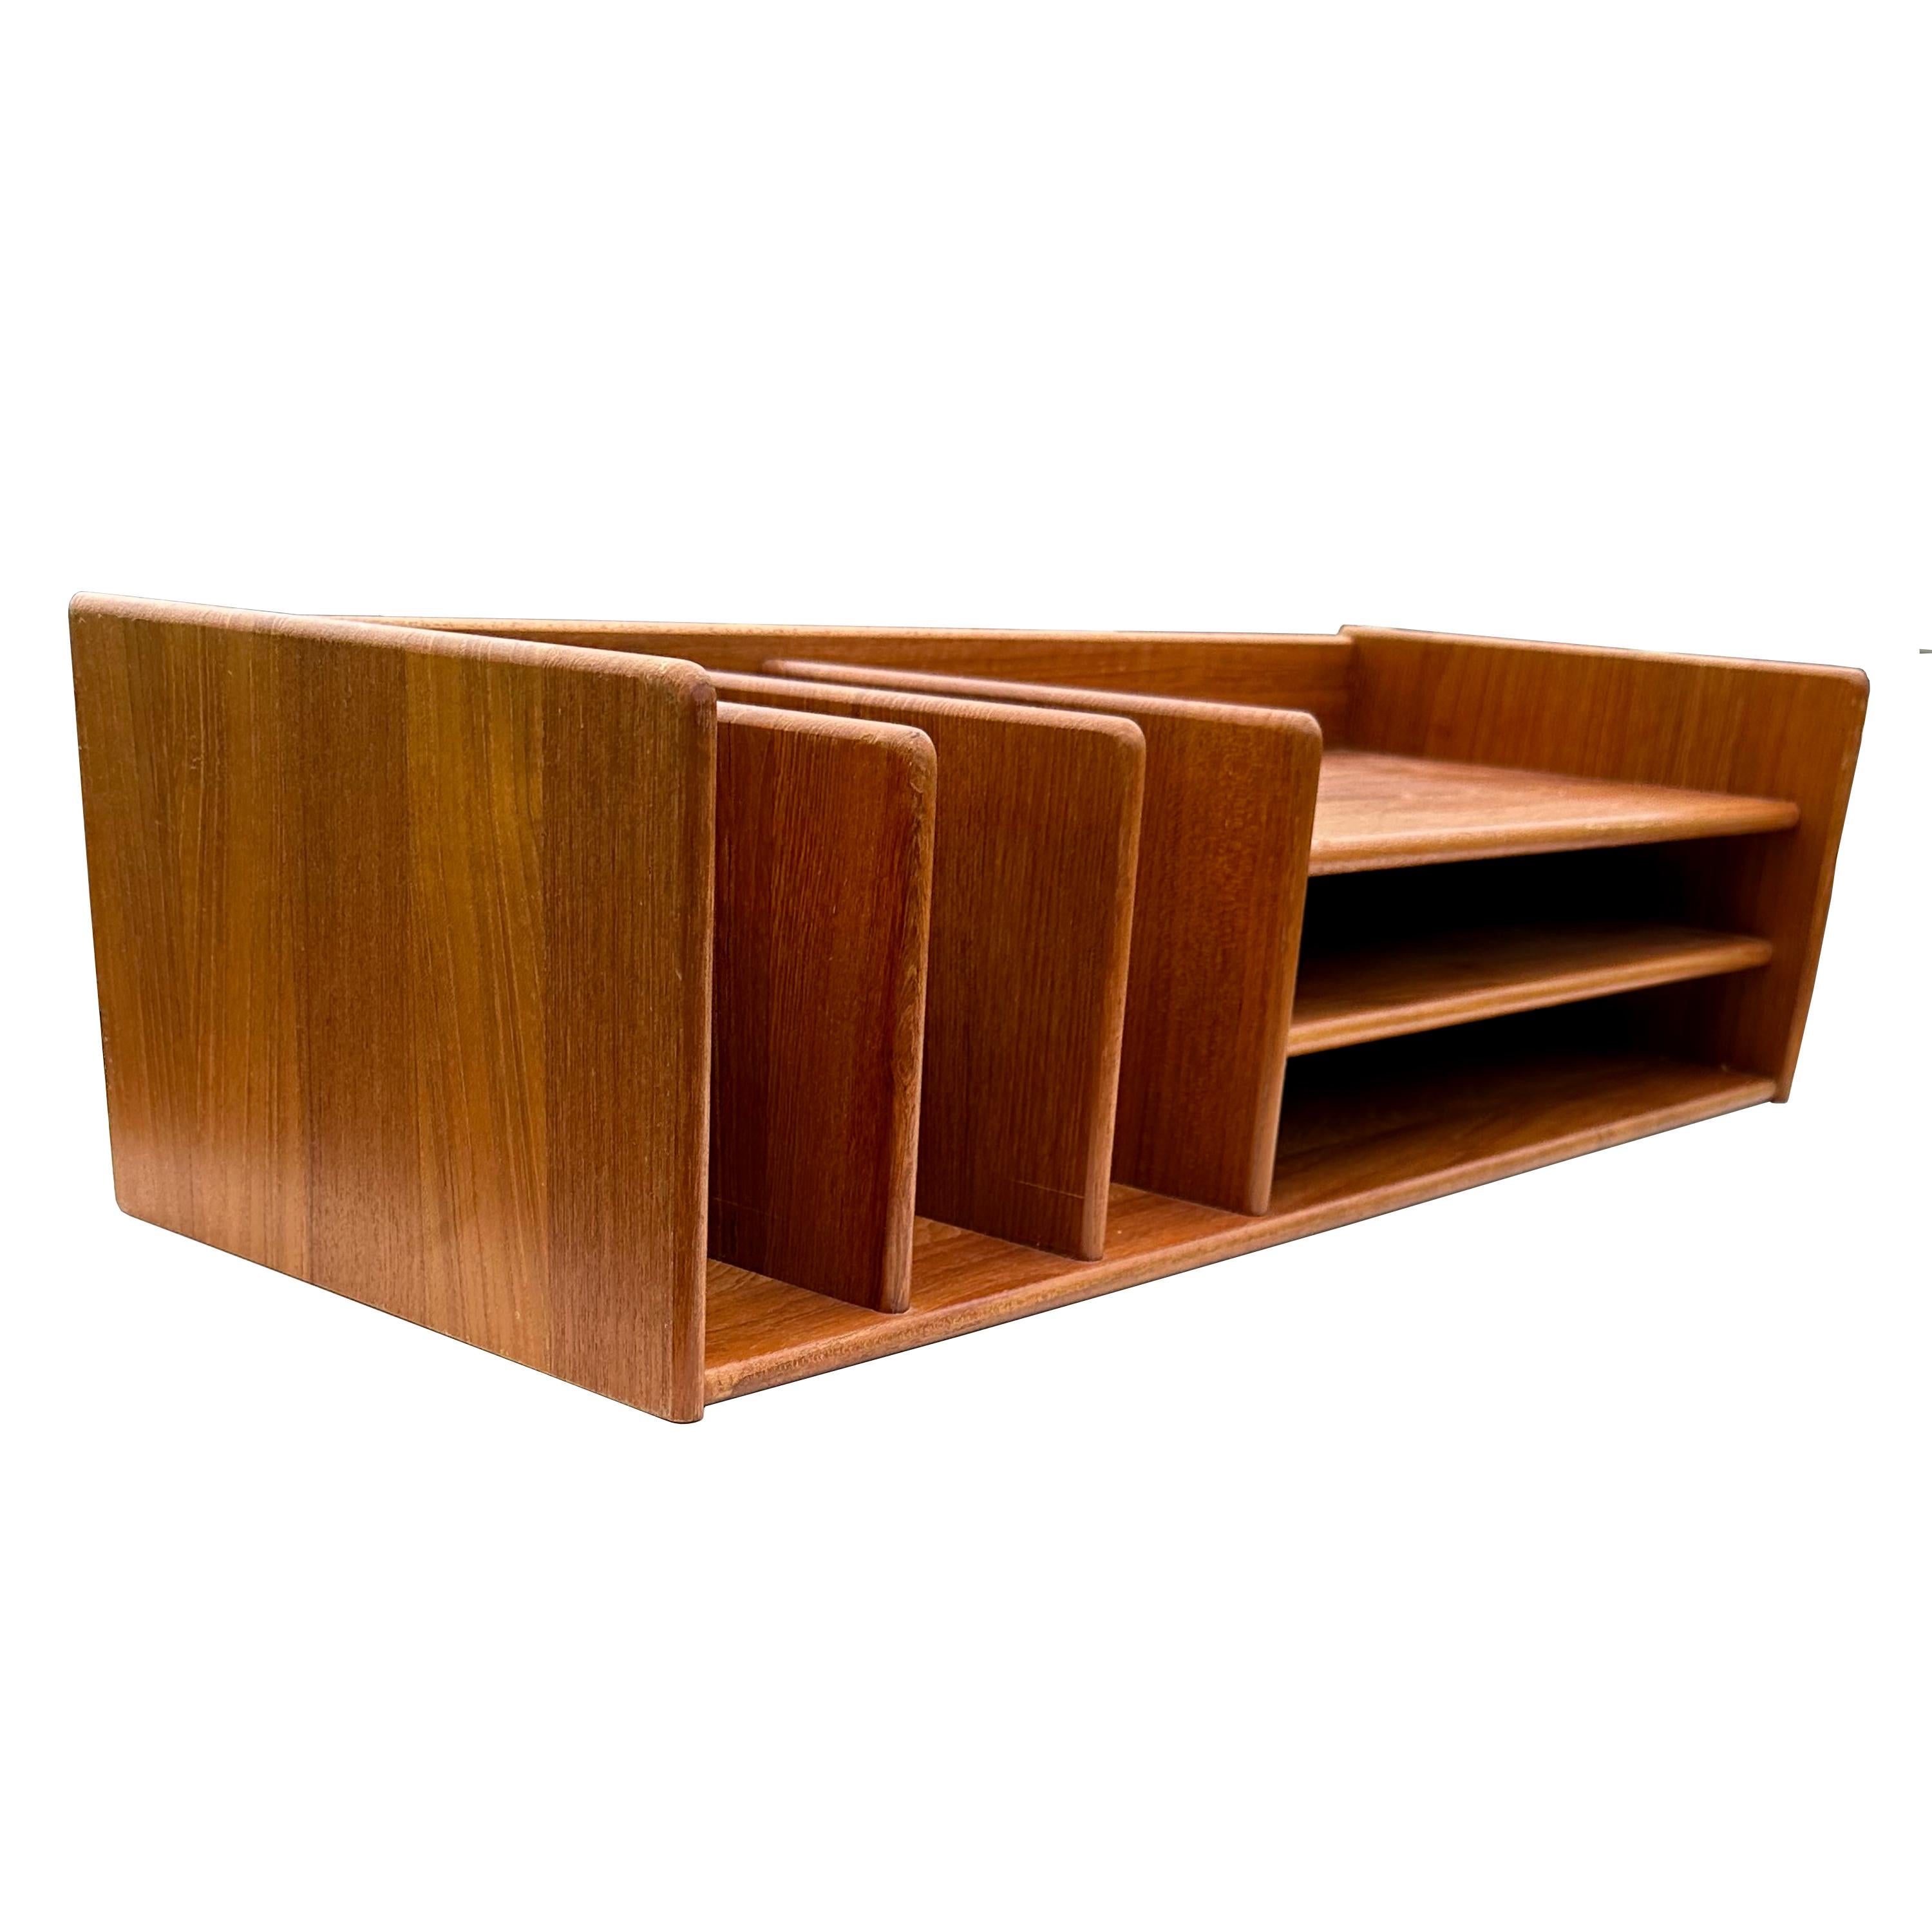 1960s Danish Mid Century modern teak wood desk organizer. From the Select Form series by Georg Petersen, put out by Pedersen & Hansen of Denmark. Beautifully rich in color this desk organizer is great quality with rounded finish edges, finished on